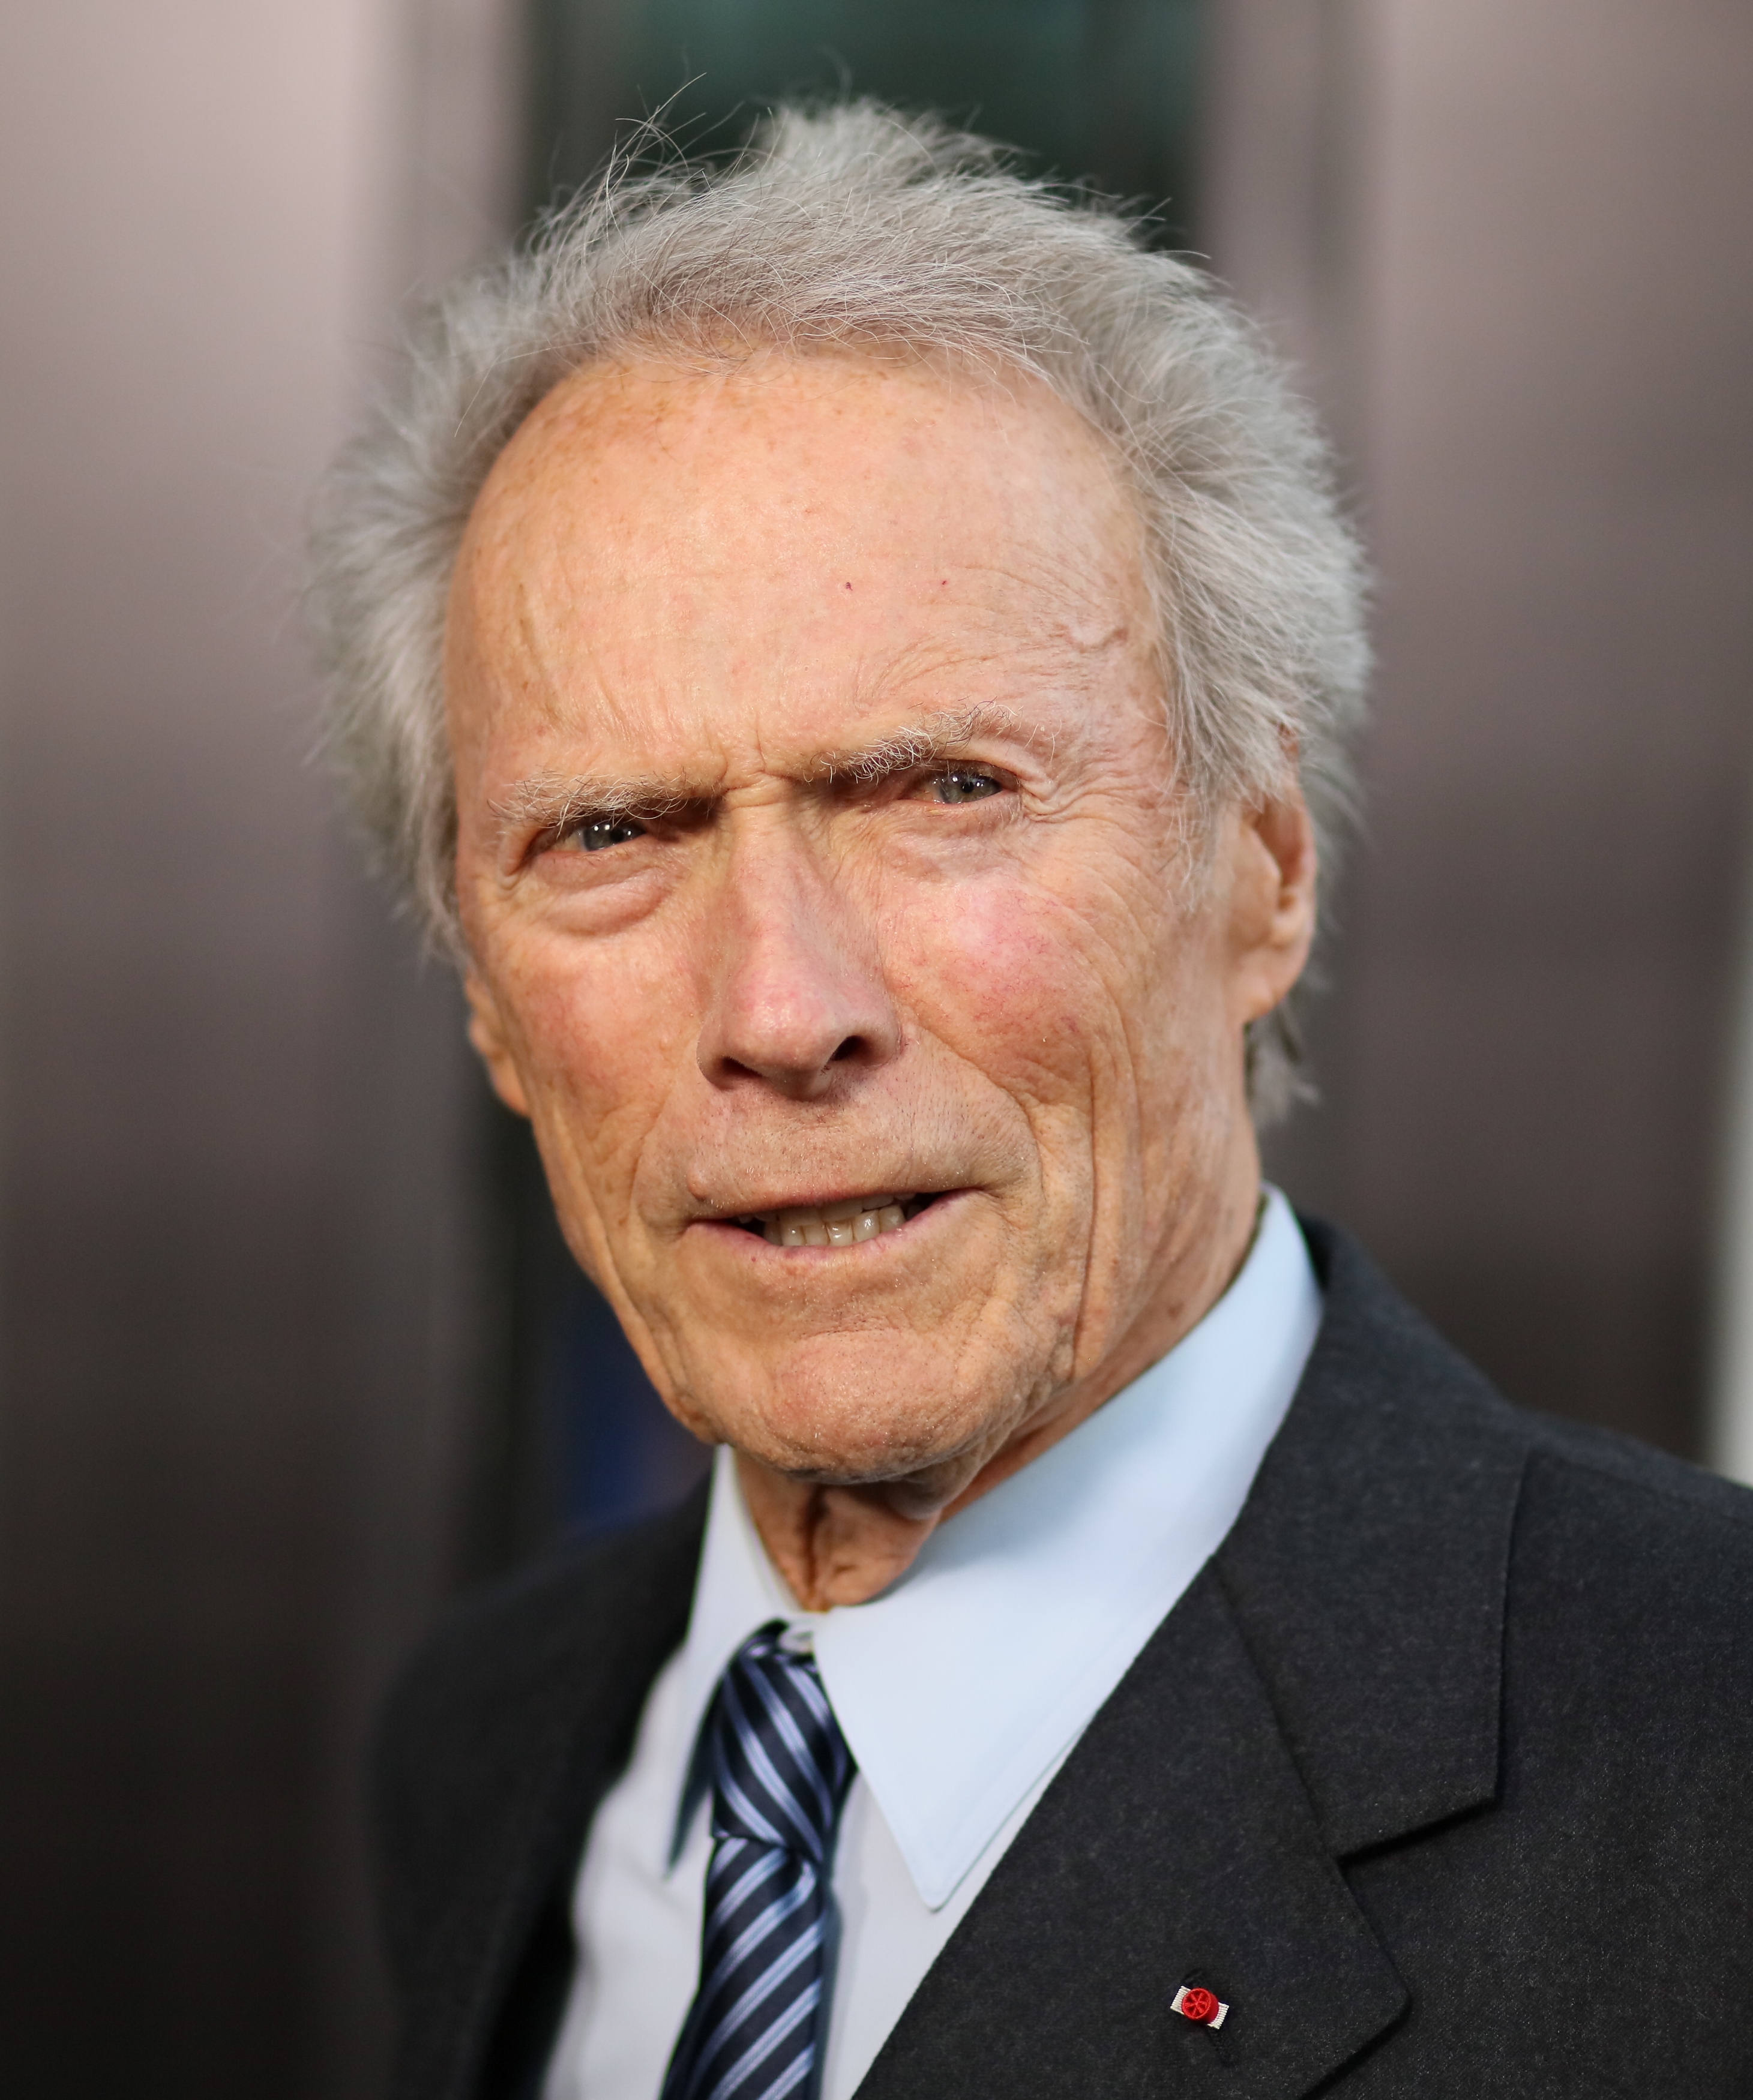 Clint Eastwood at the screening of  'Sully' in Los Angeles in 2016 | Source: Getty Images